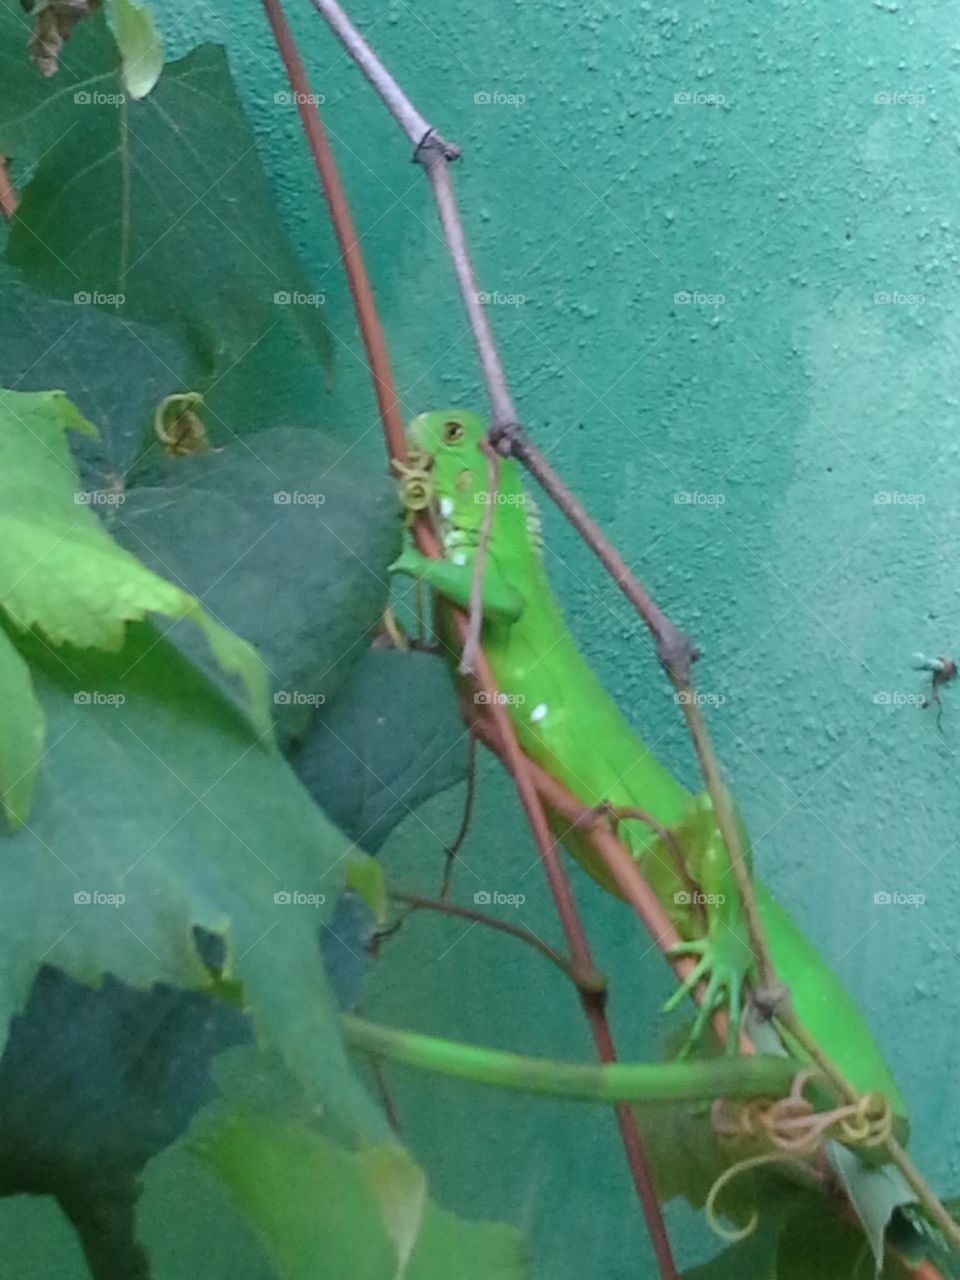 We found this dude chillin on my mum's grape plant back in Venezuela